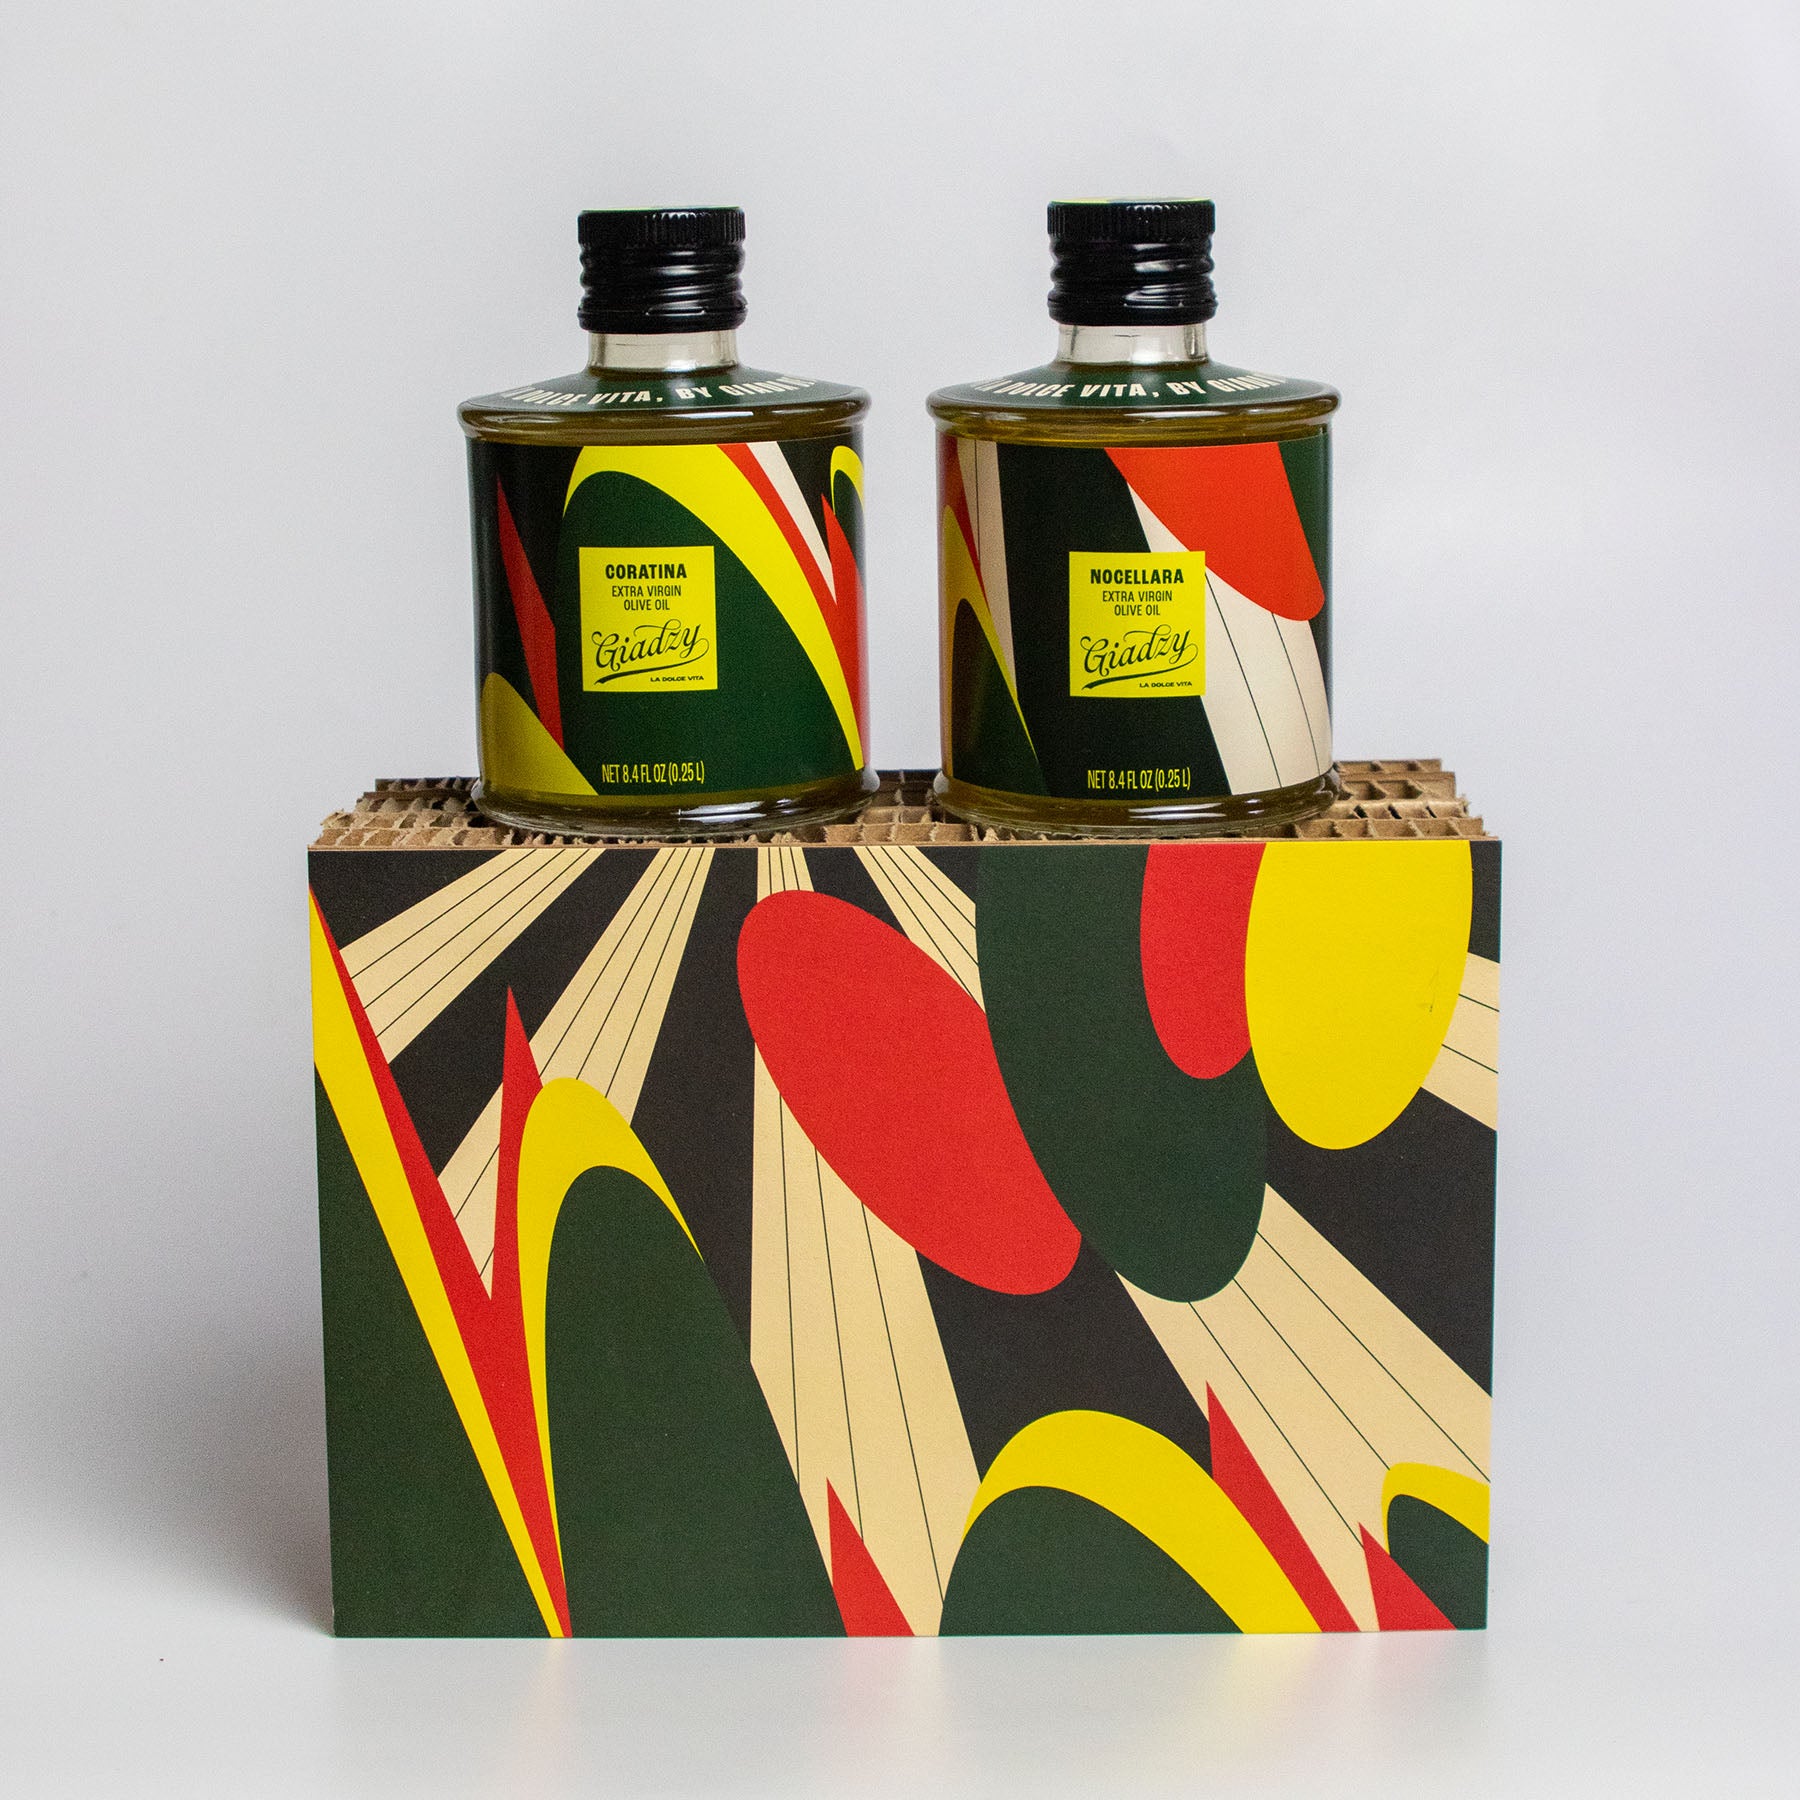 Olive Oil Italy Tour Gift Set, Set of 2 by Giadzy + Galateo & Friends